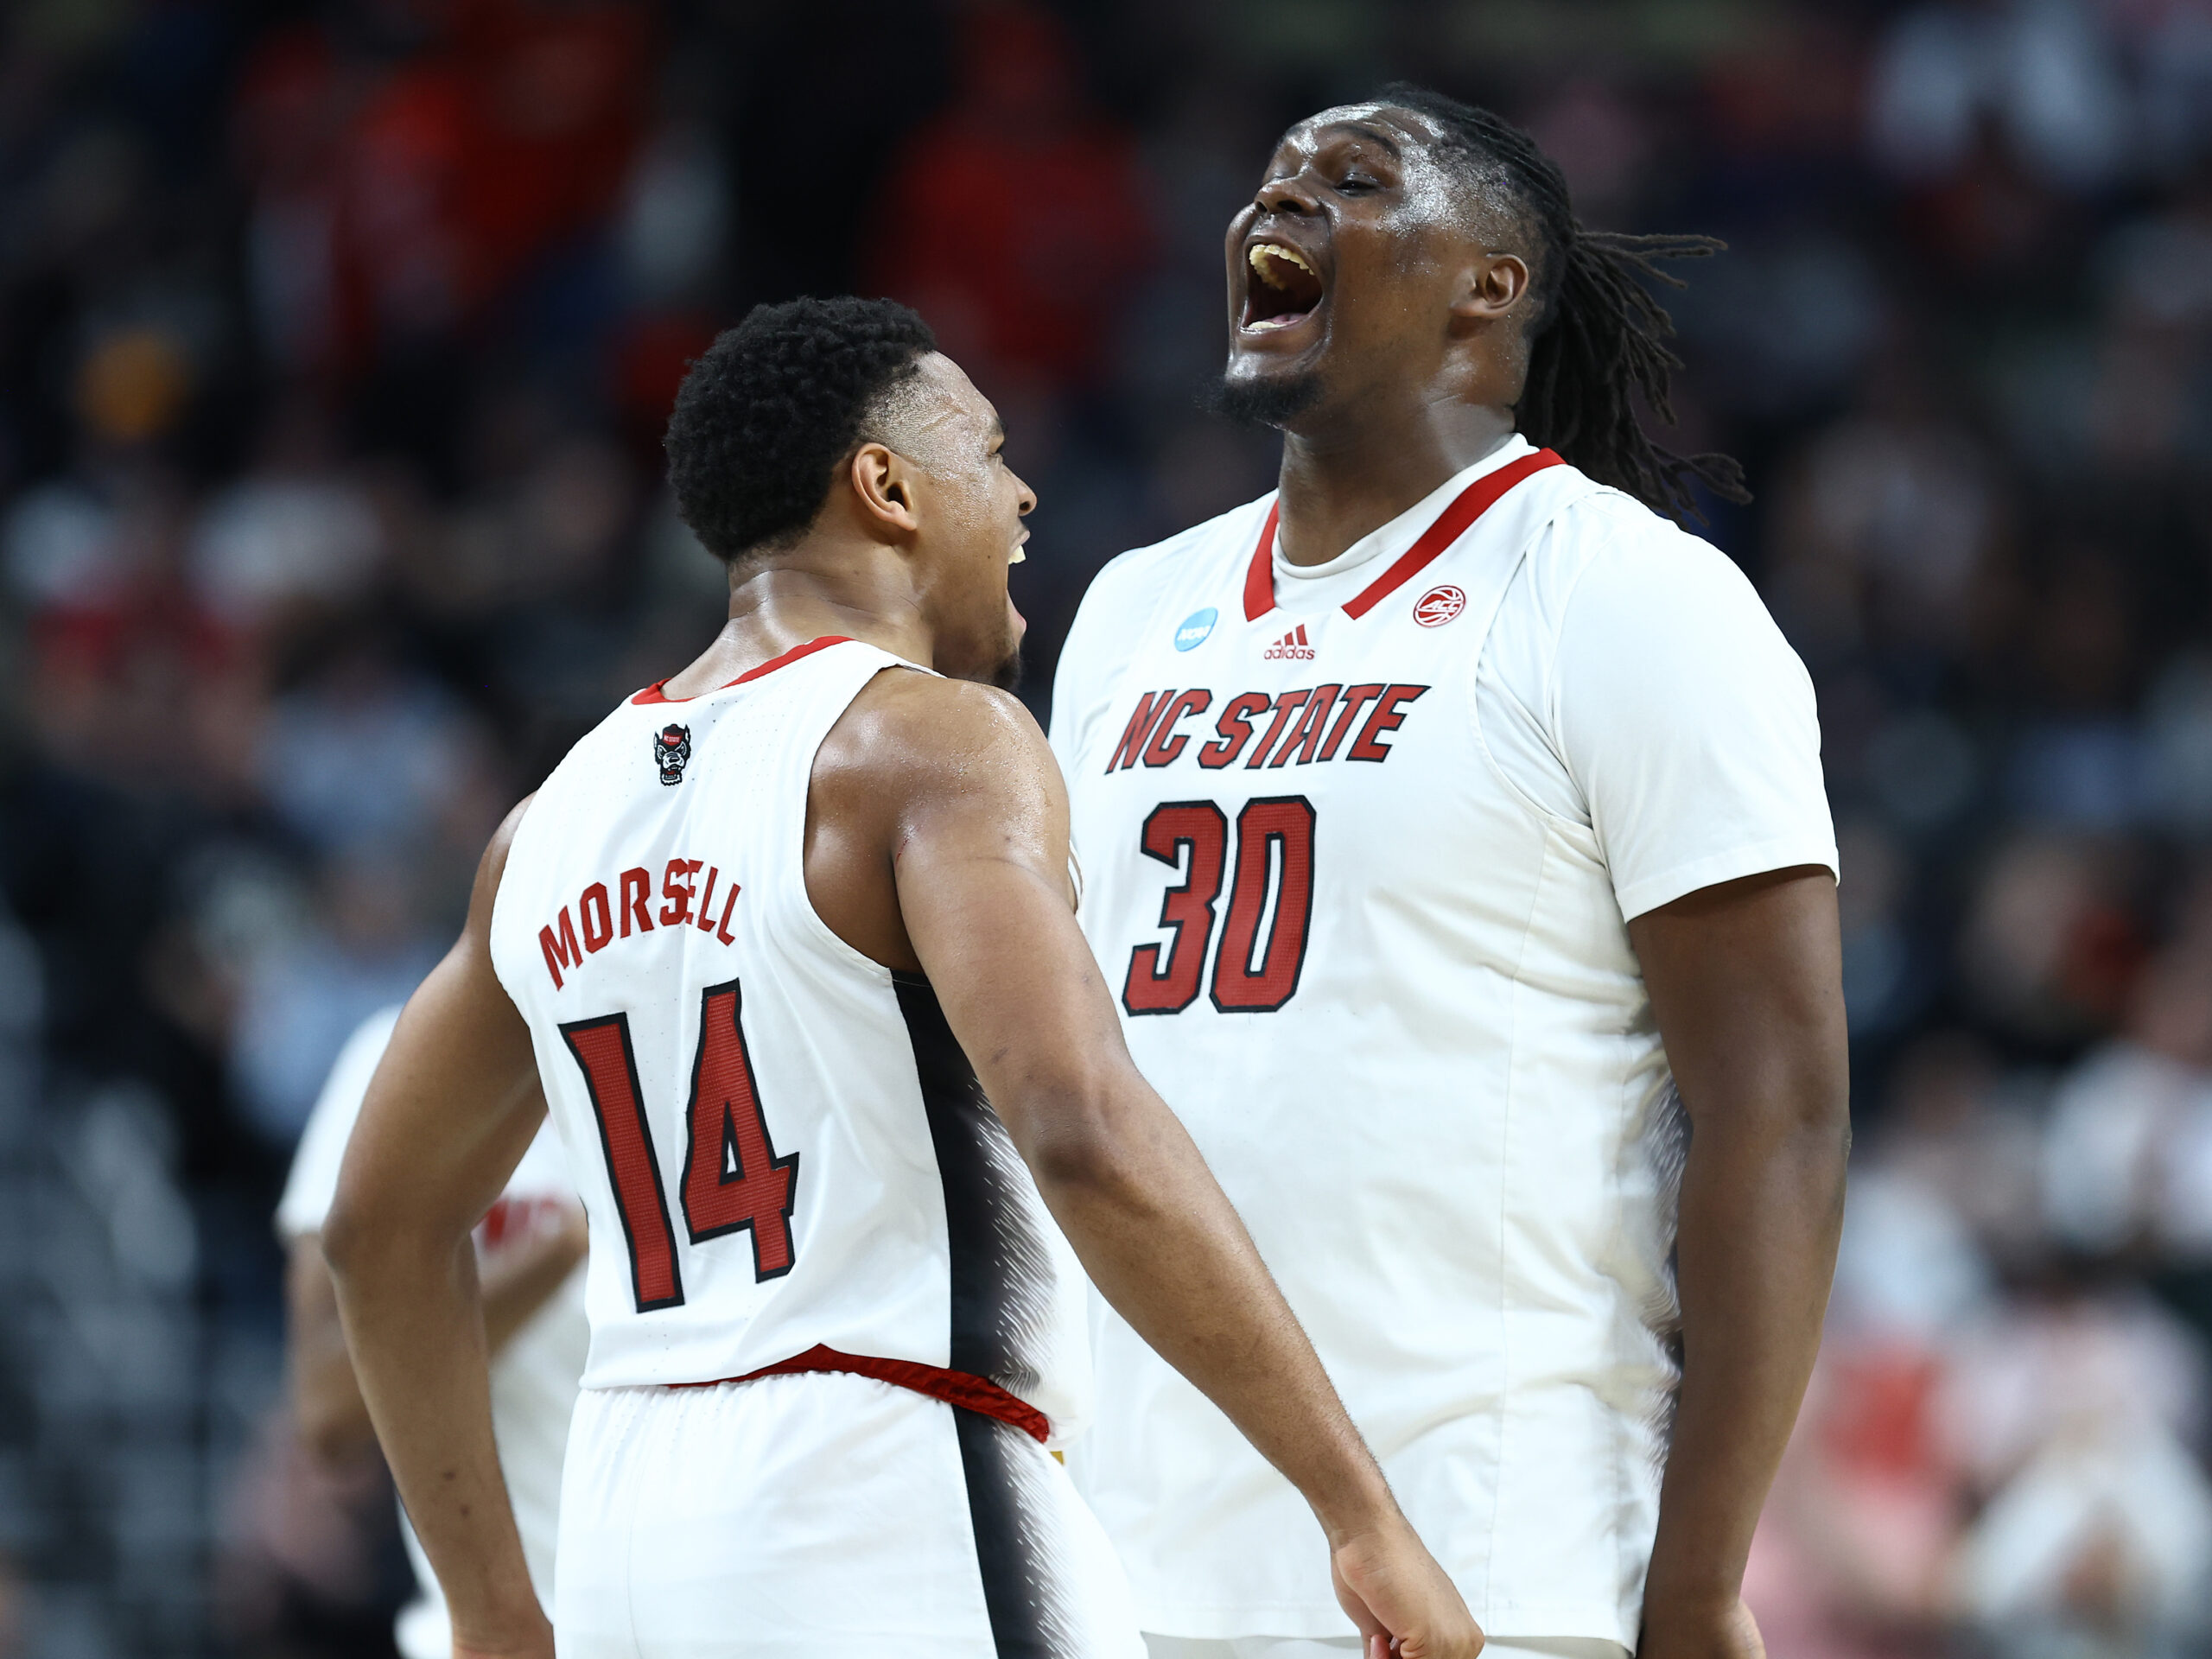 Casey Morsell and DJ Burns Jr. of the North Carolina State Wolfpack celebrate during their win over 14-seed Oakland in the first weekend of the NCAA Tournament.